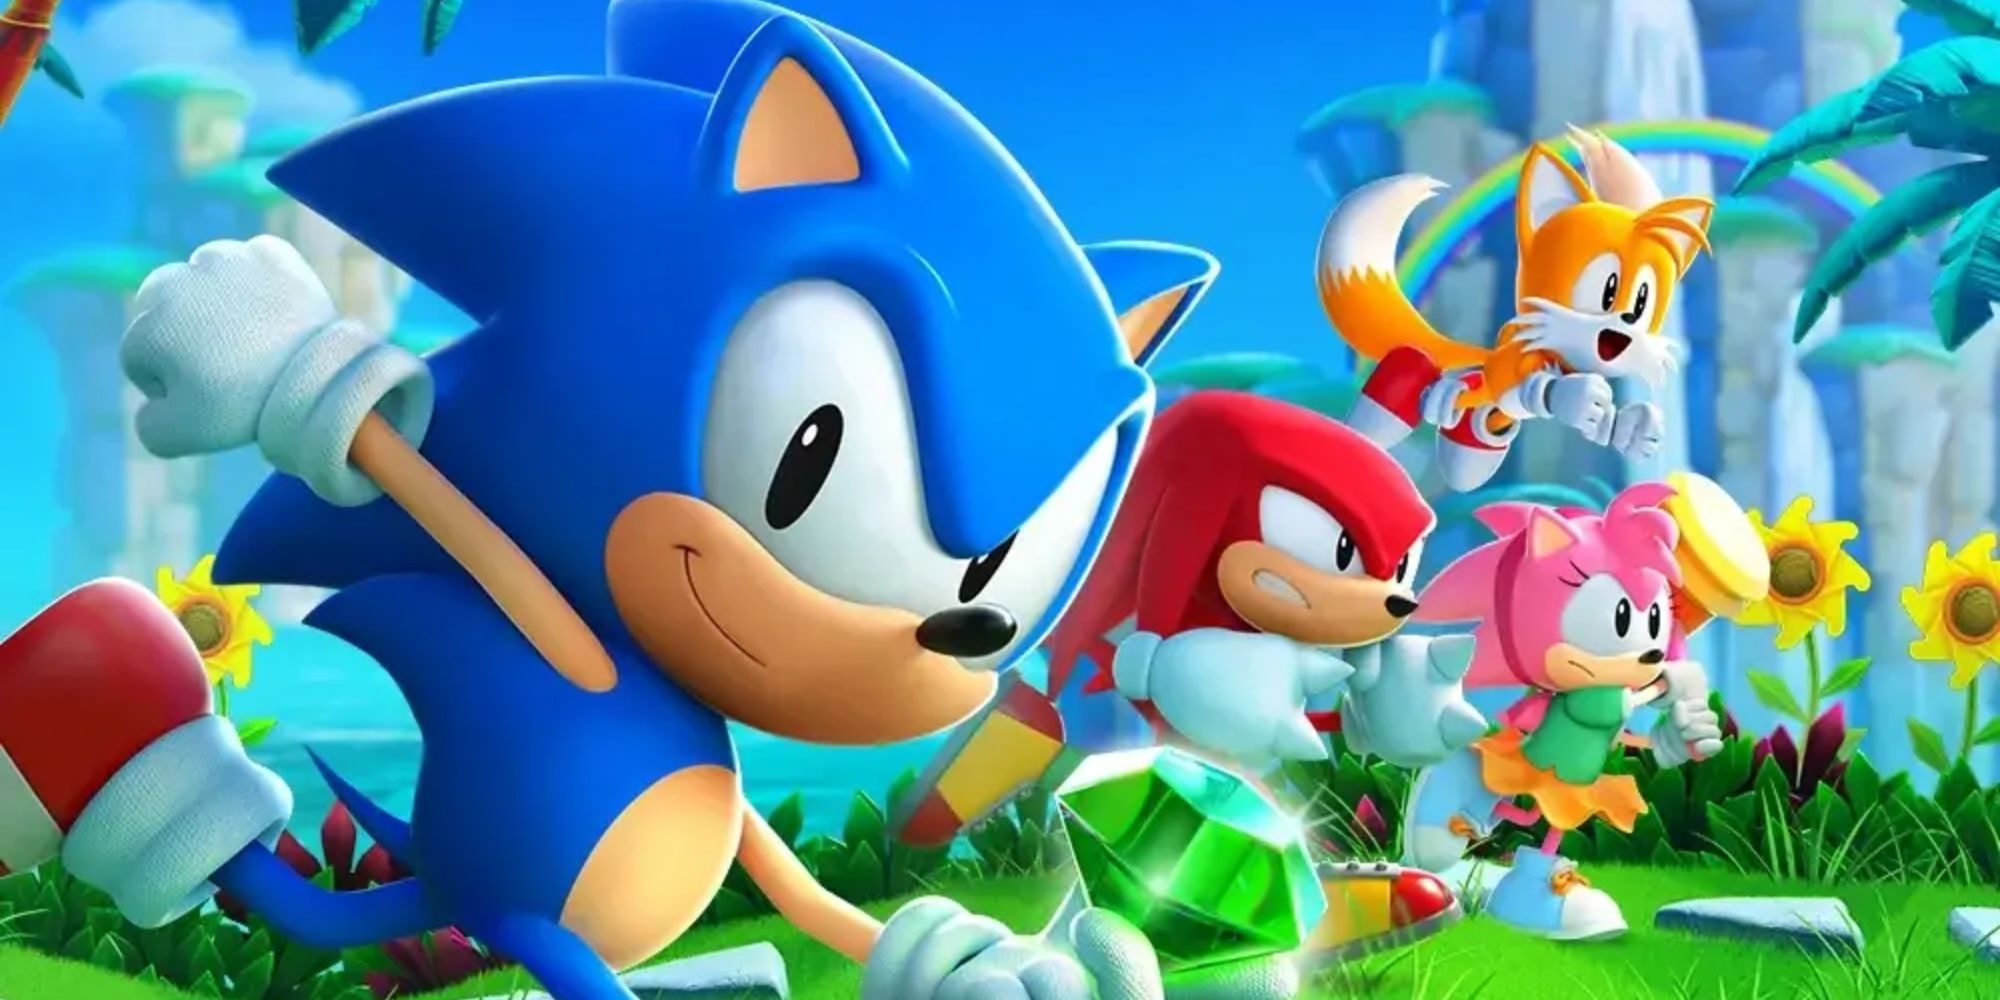 From front to back - Sonic, Knuckles, Amy, and Tails all running in a line